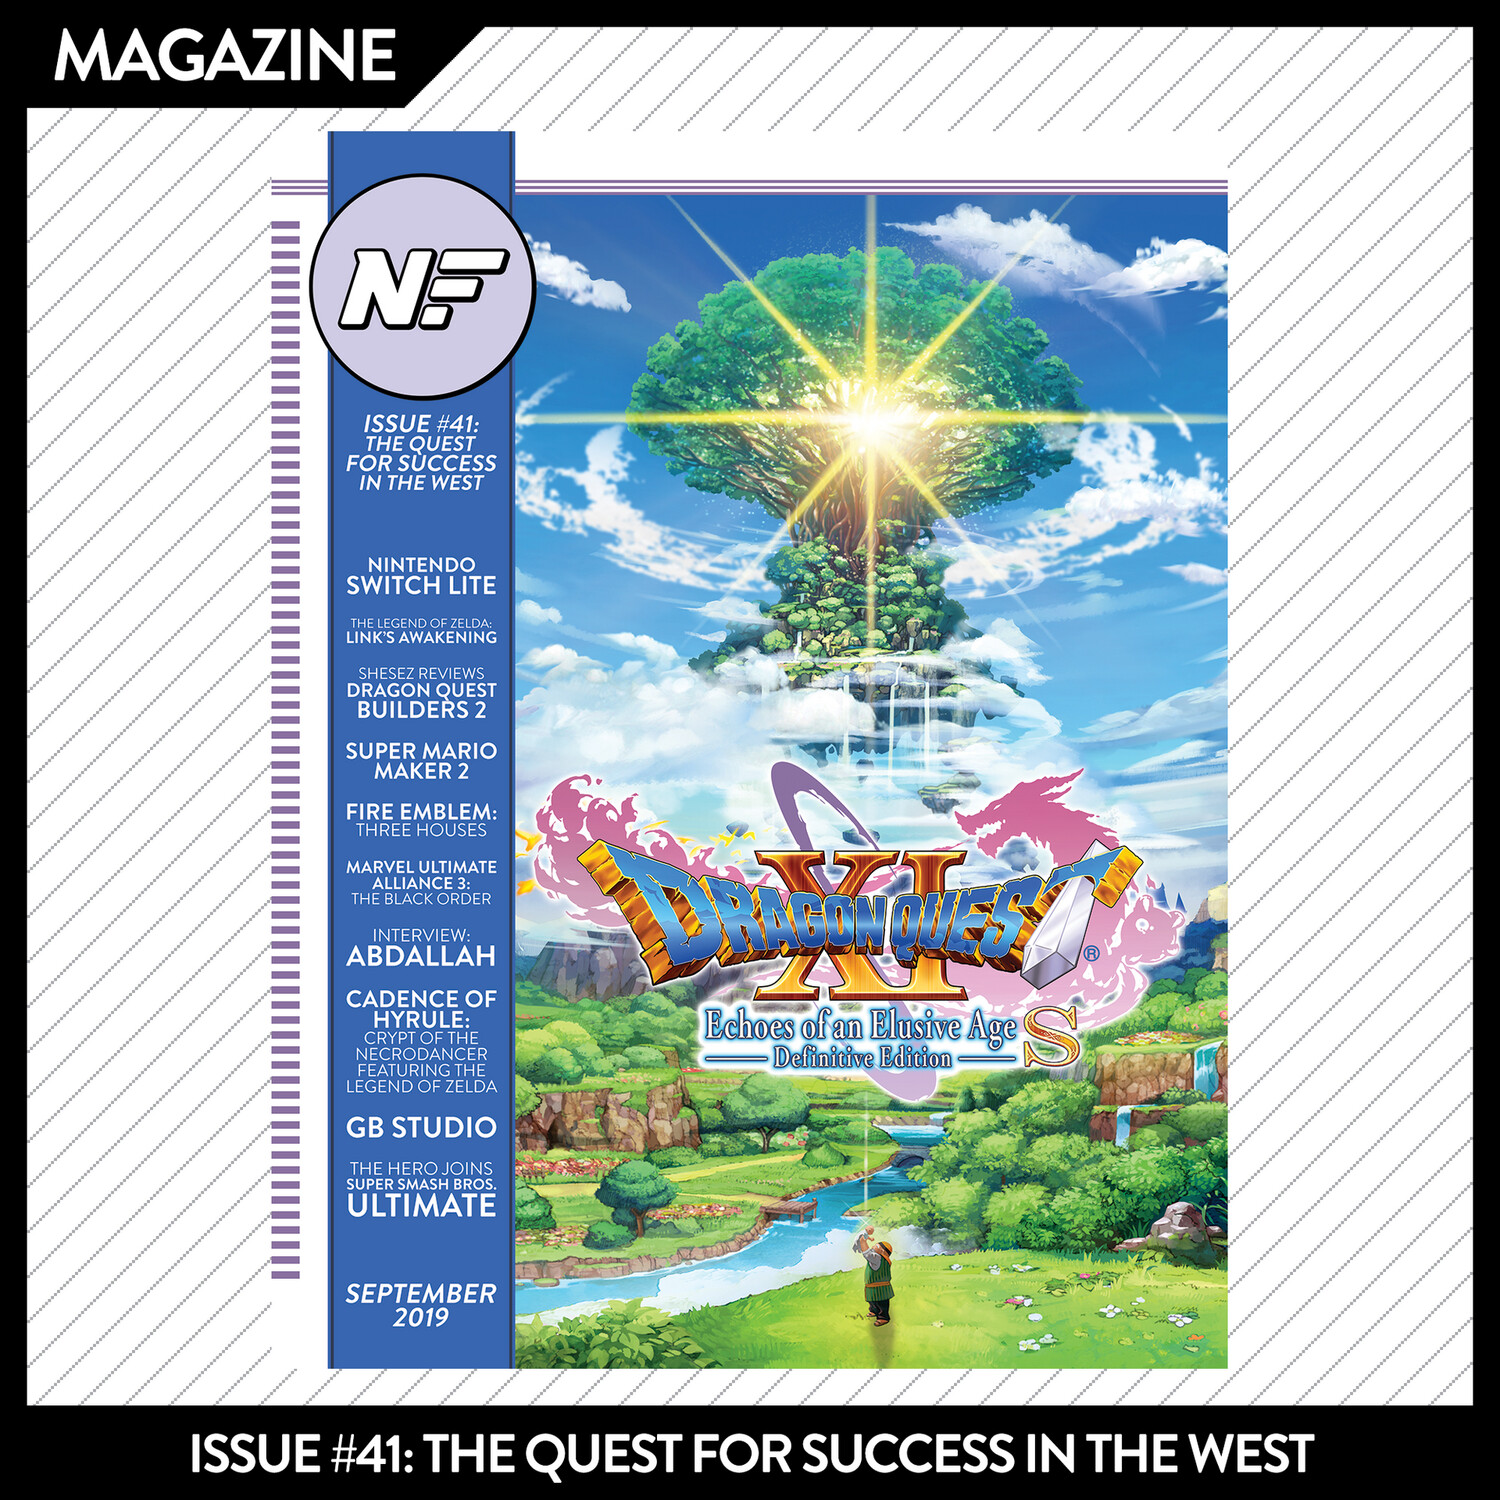 Issue #41: The Quest for Success in the West – September 2019